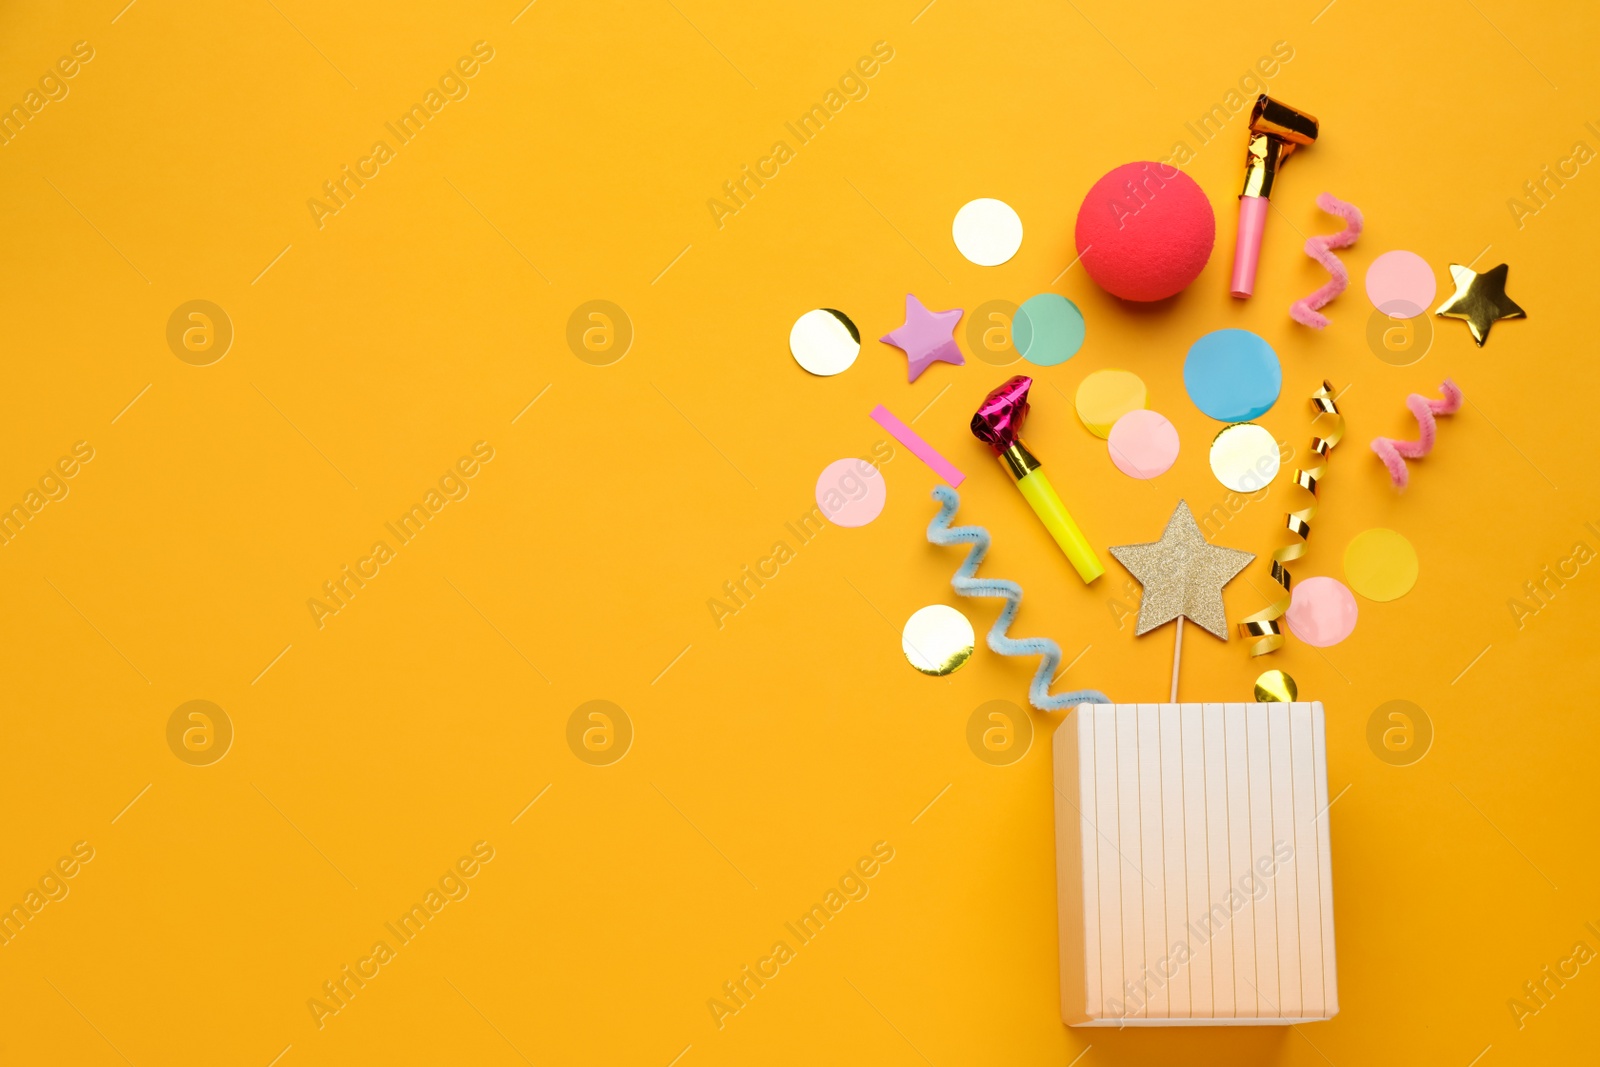 Photo of Flat lay composition with party items and box on orange background, space for text